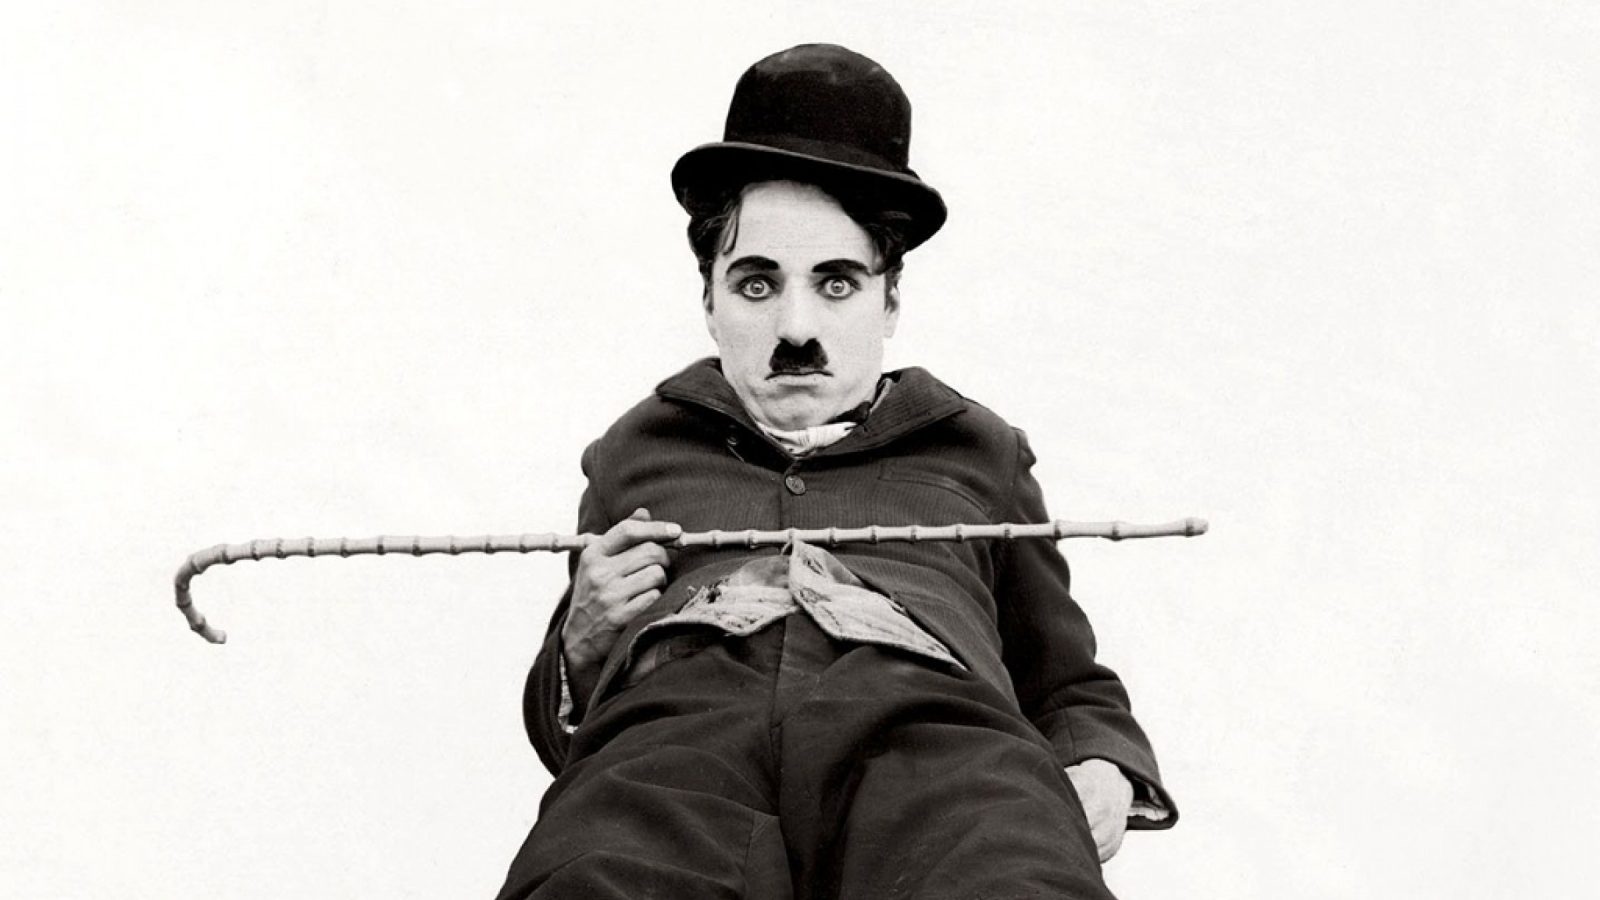 80% Of People Can’t Get 12/18 on This General Knowledge Quiz (feat. Charlie Chaplin) — Can You? Charlie Chaplin 2